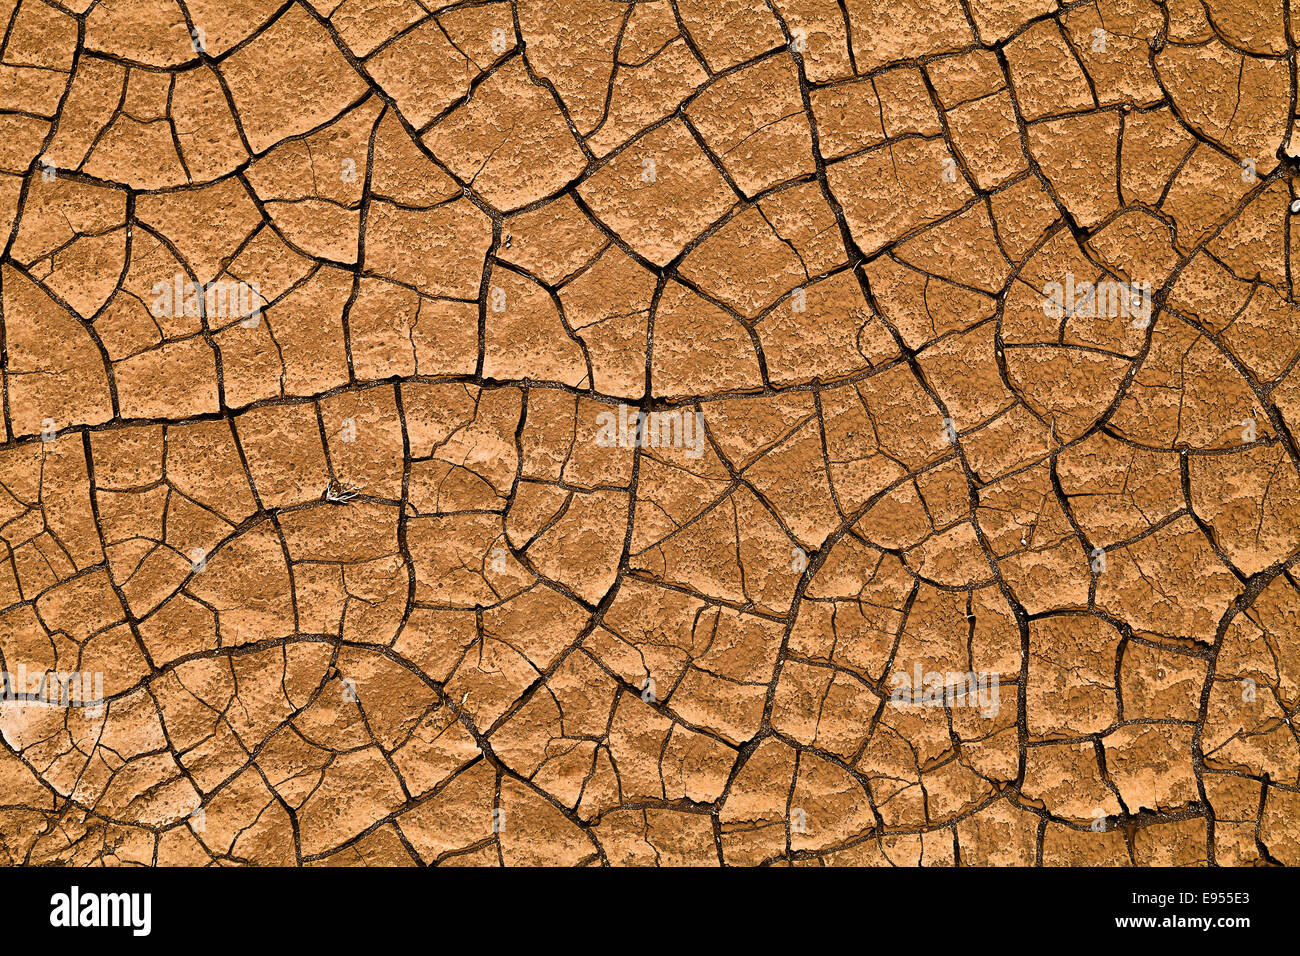 Mud structure, cracked crust of a dried up waterhole, island of Boa Vista, Cape Verde, Republic of Cabo Verde Stock Photo